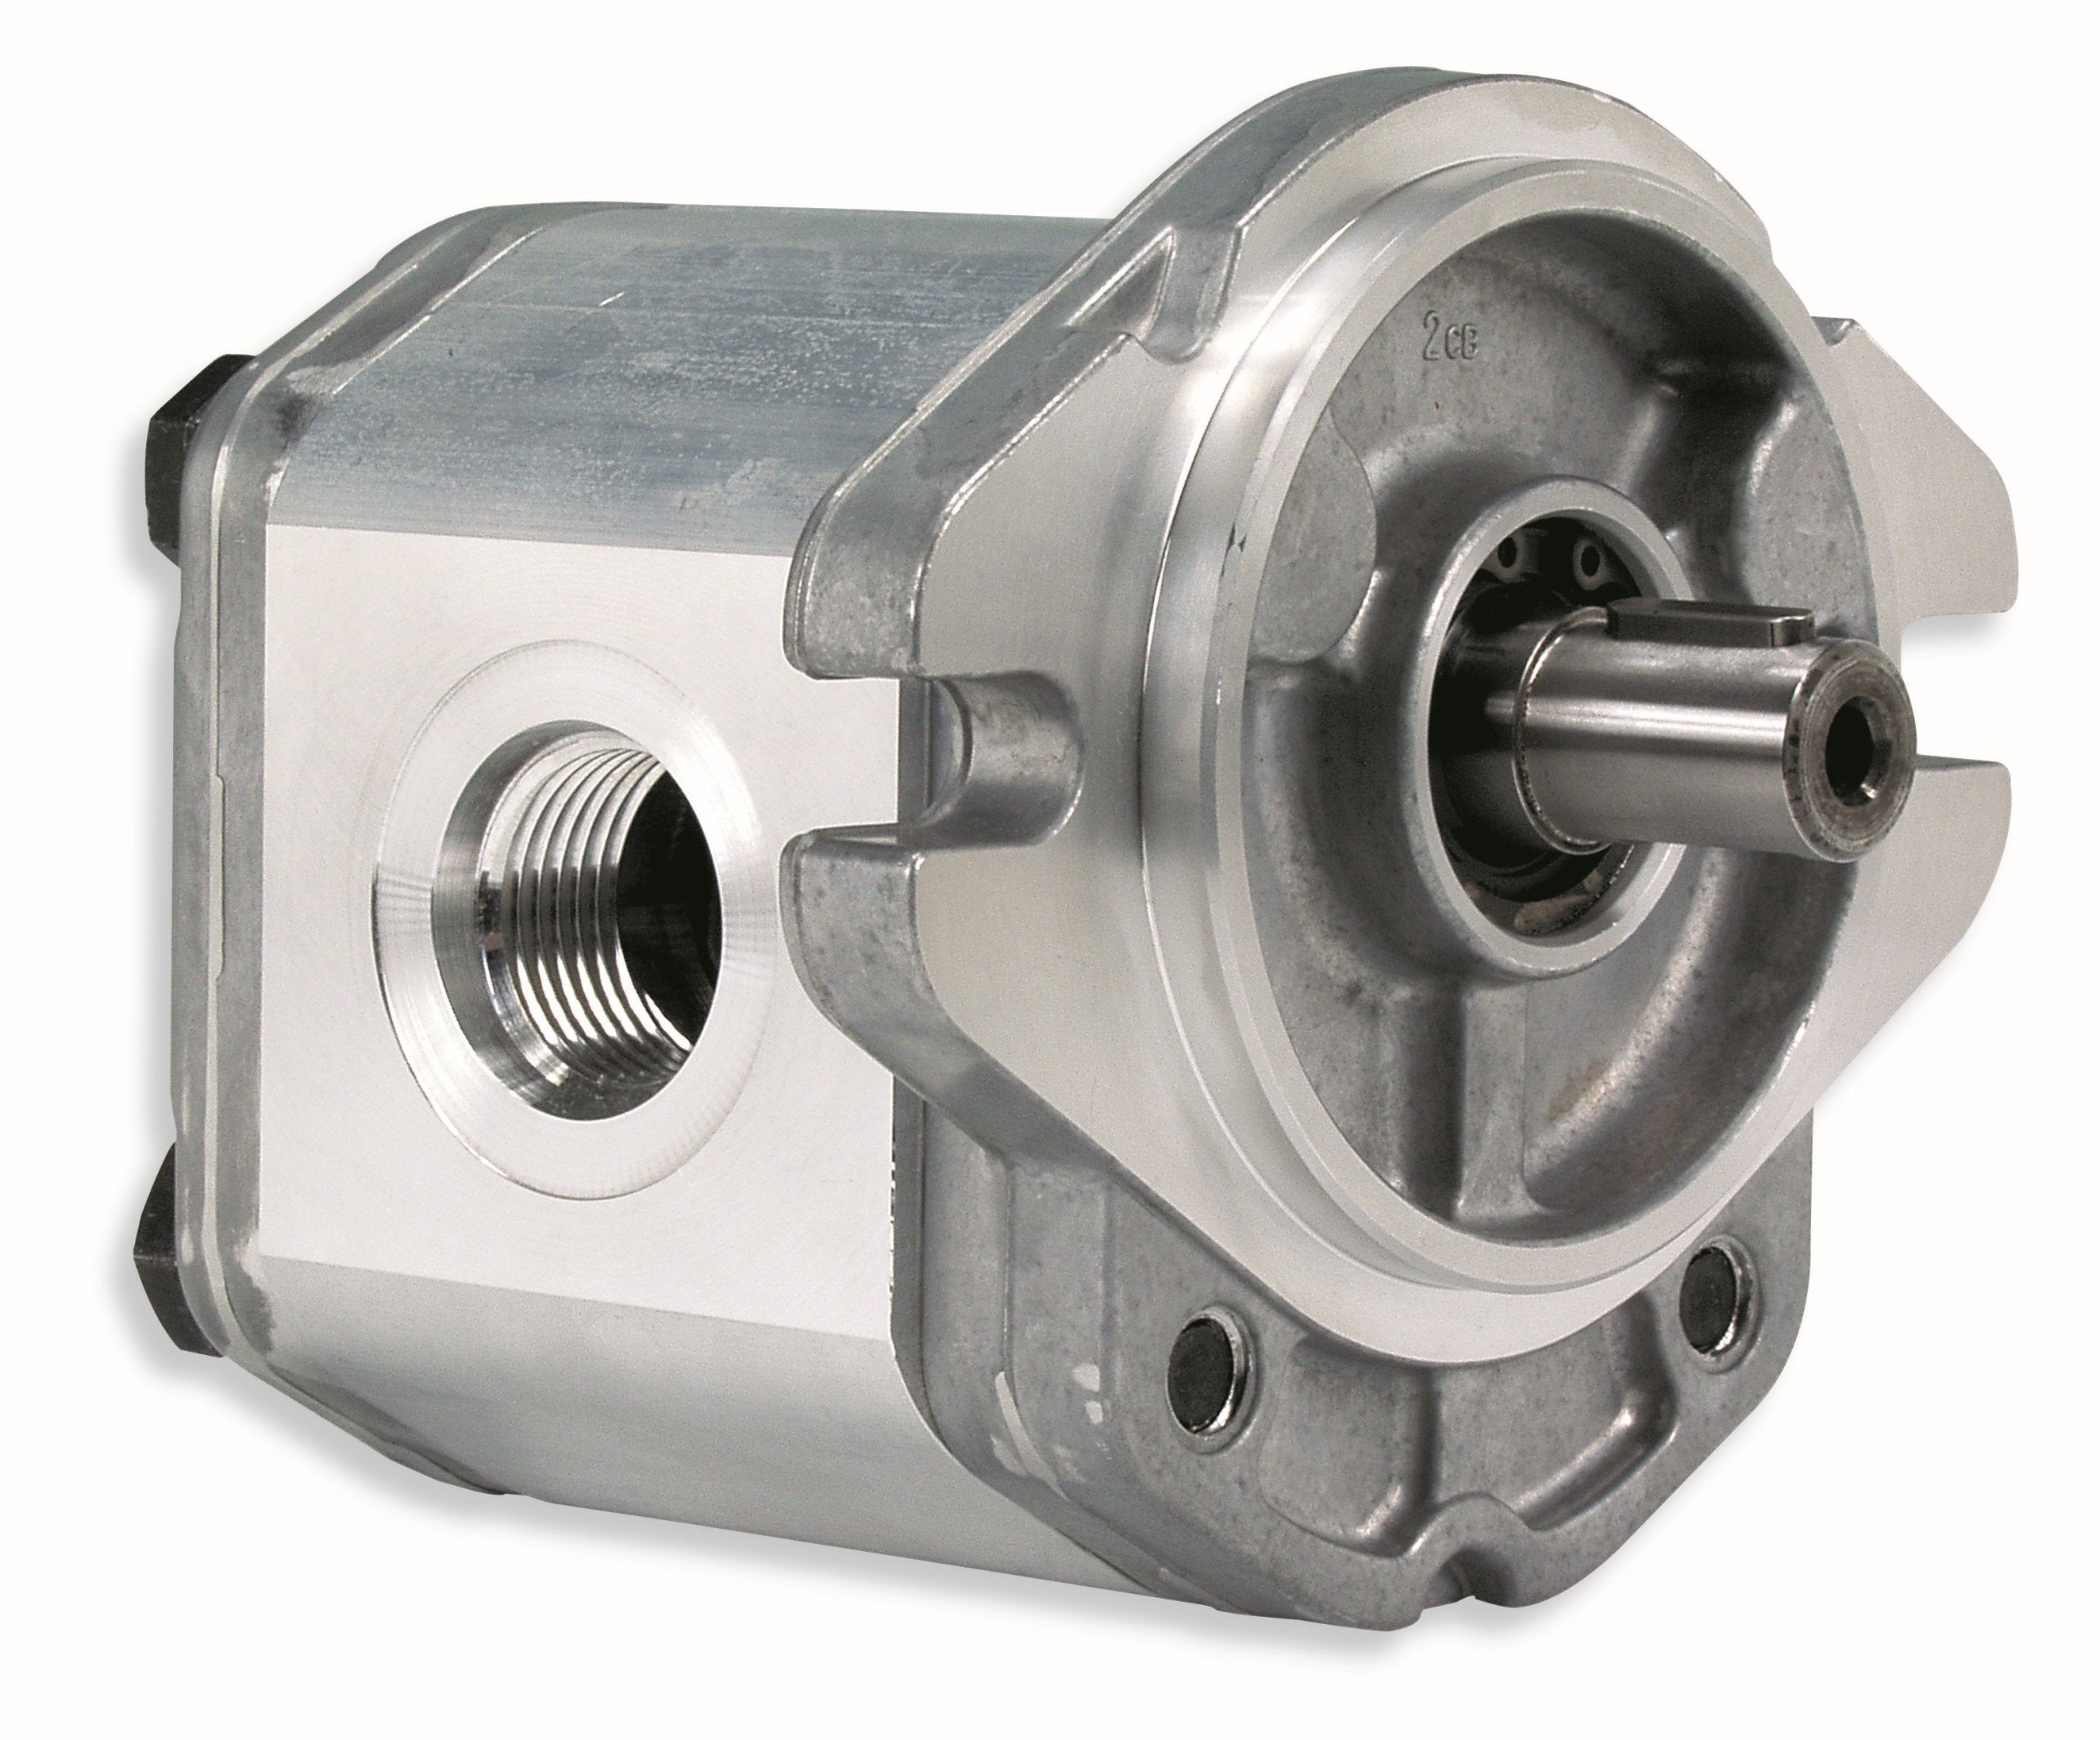 GHM2A-R-34-E2 : Marzocchi Gear Motor, Bidirectional, 23.7cc, 3335psi rated, 2000RPM, 0.75 (3/4") #12 SAE ports, 5/8" Bore x 5/32" Keyed Shaft